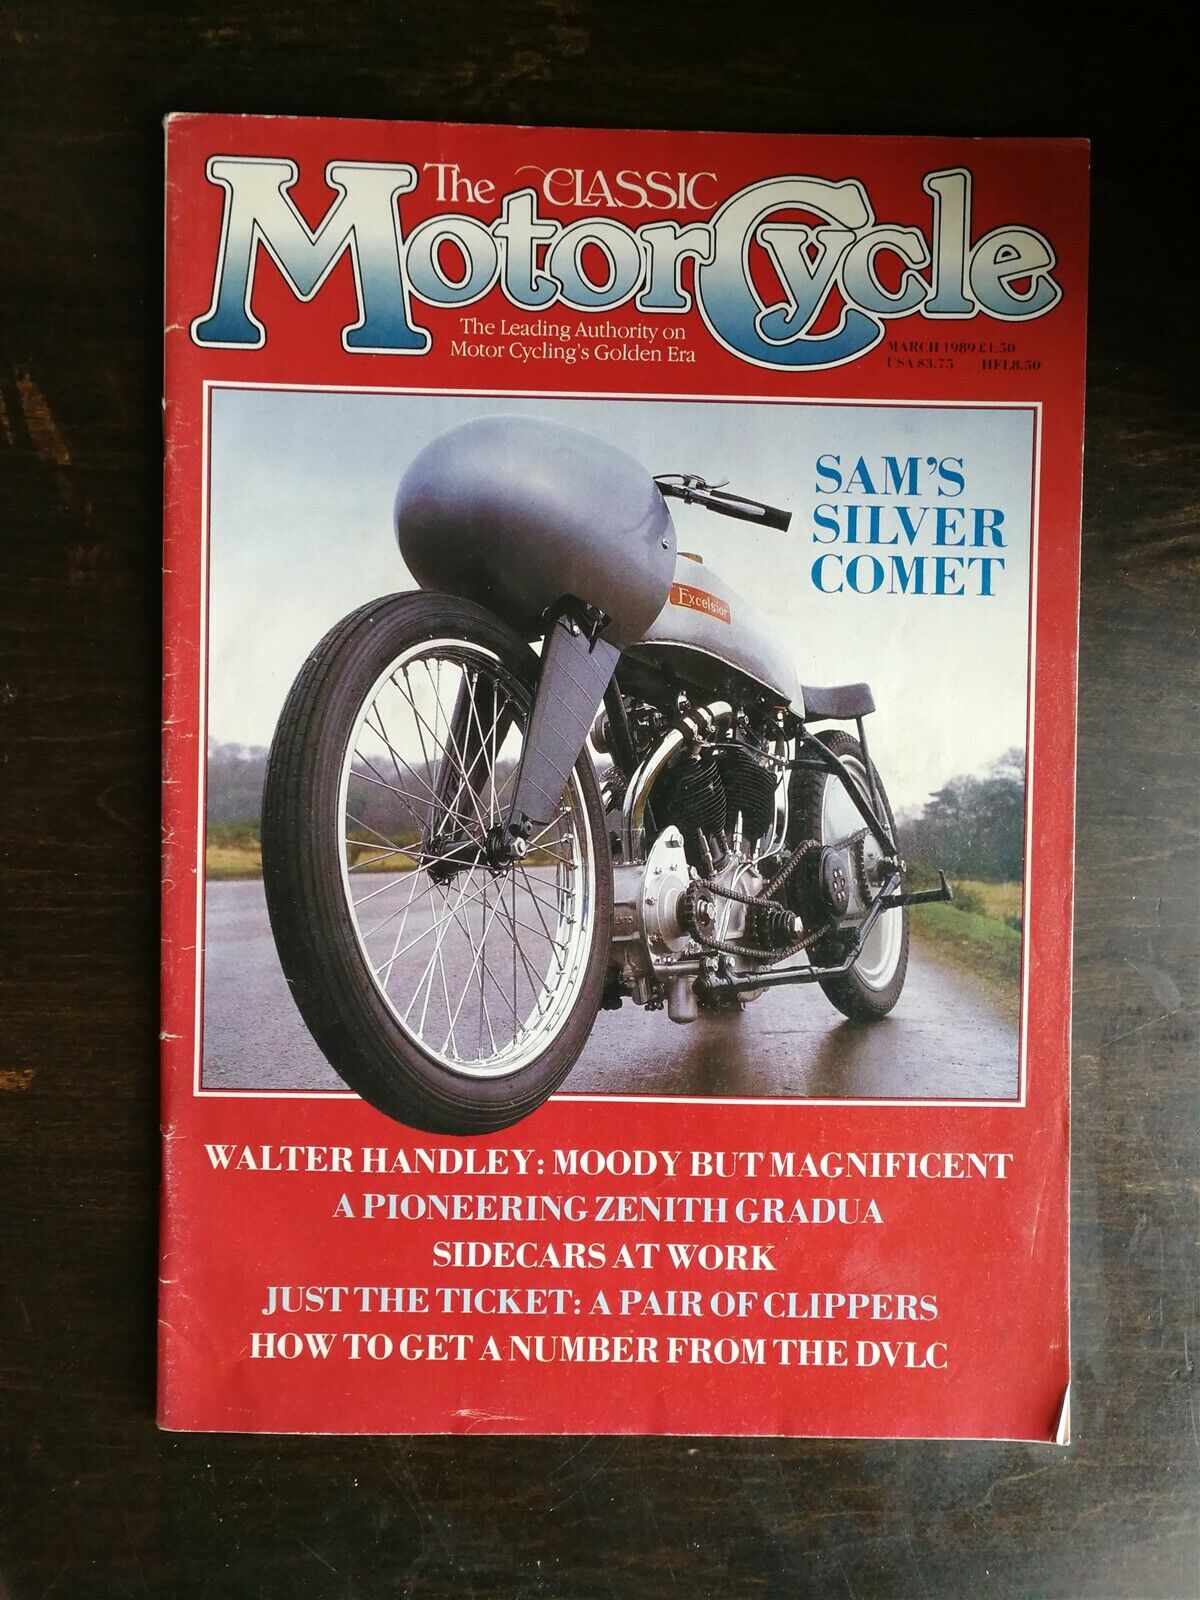 The Classic Motorcycle March 1989 1957 & 1959 Royal Enfield 1913 Zenith Gradua